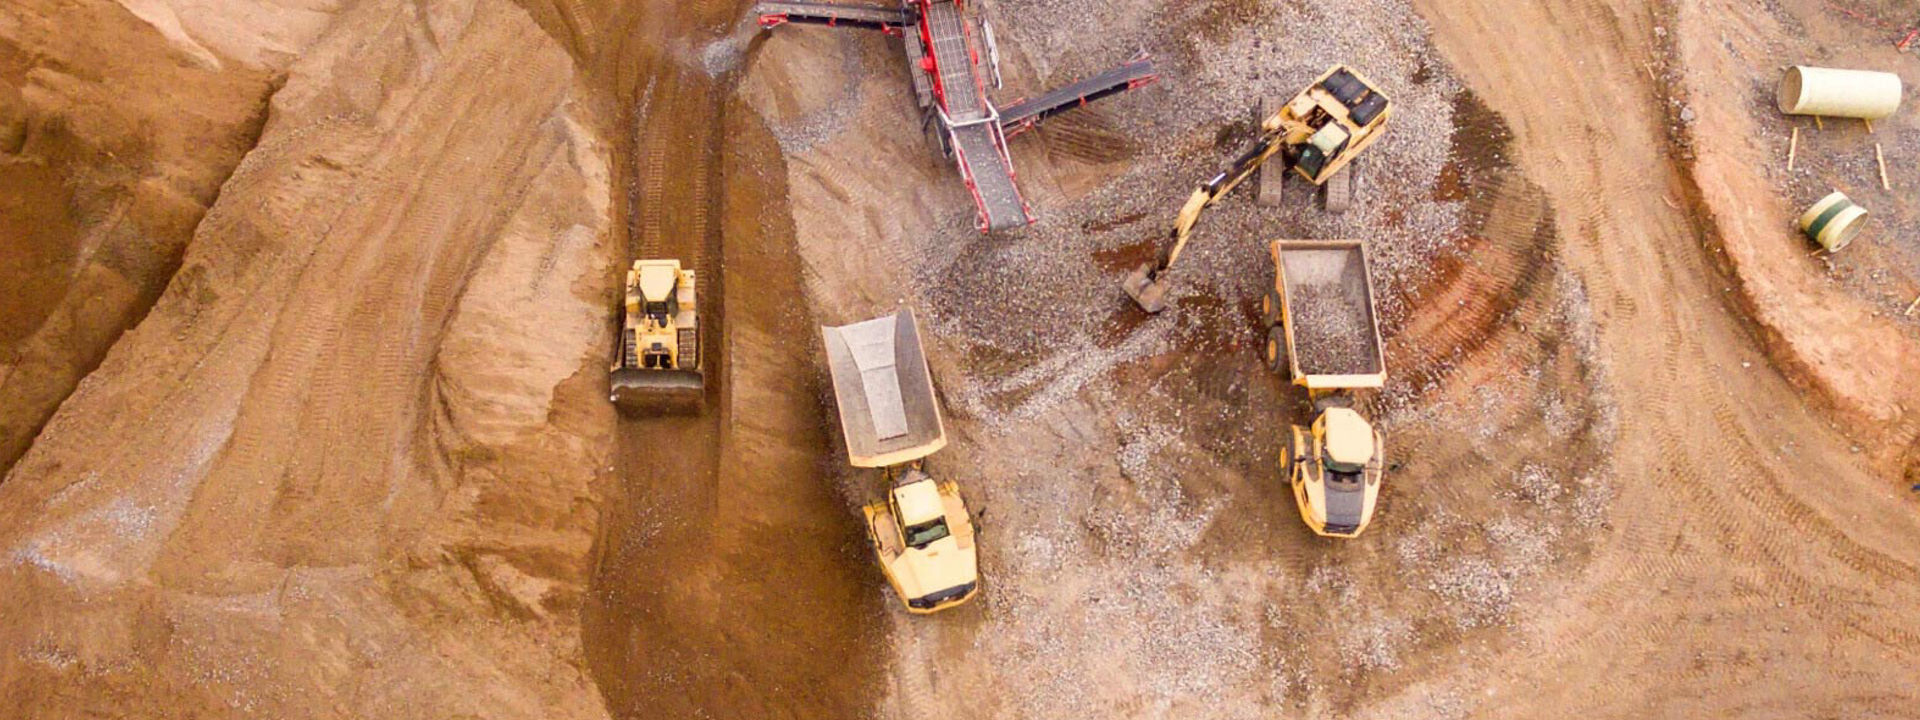 Multiple articulated dump trucks working at a large construction site